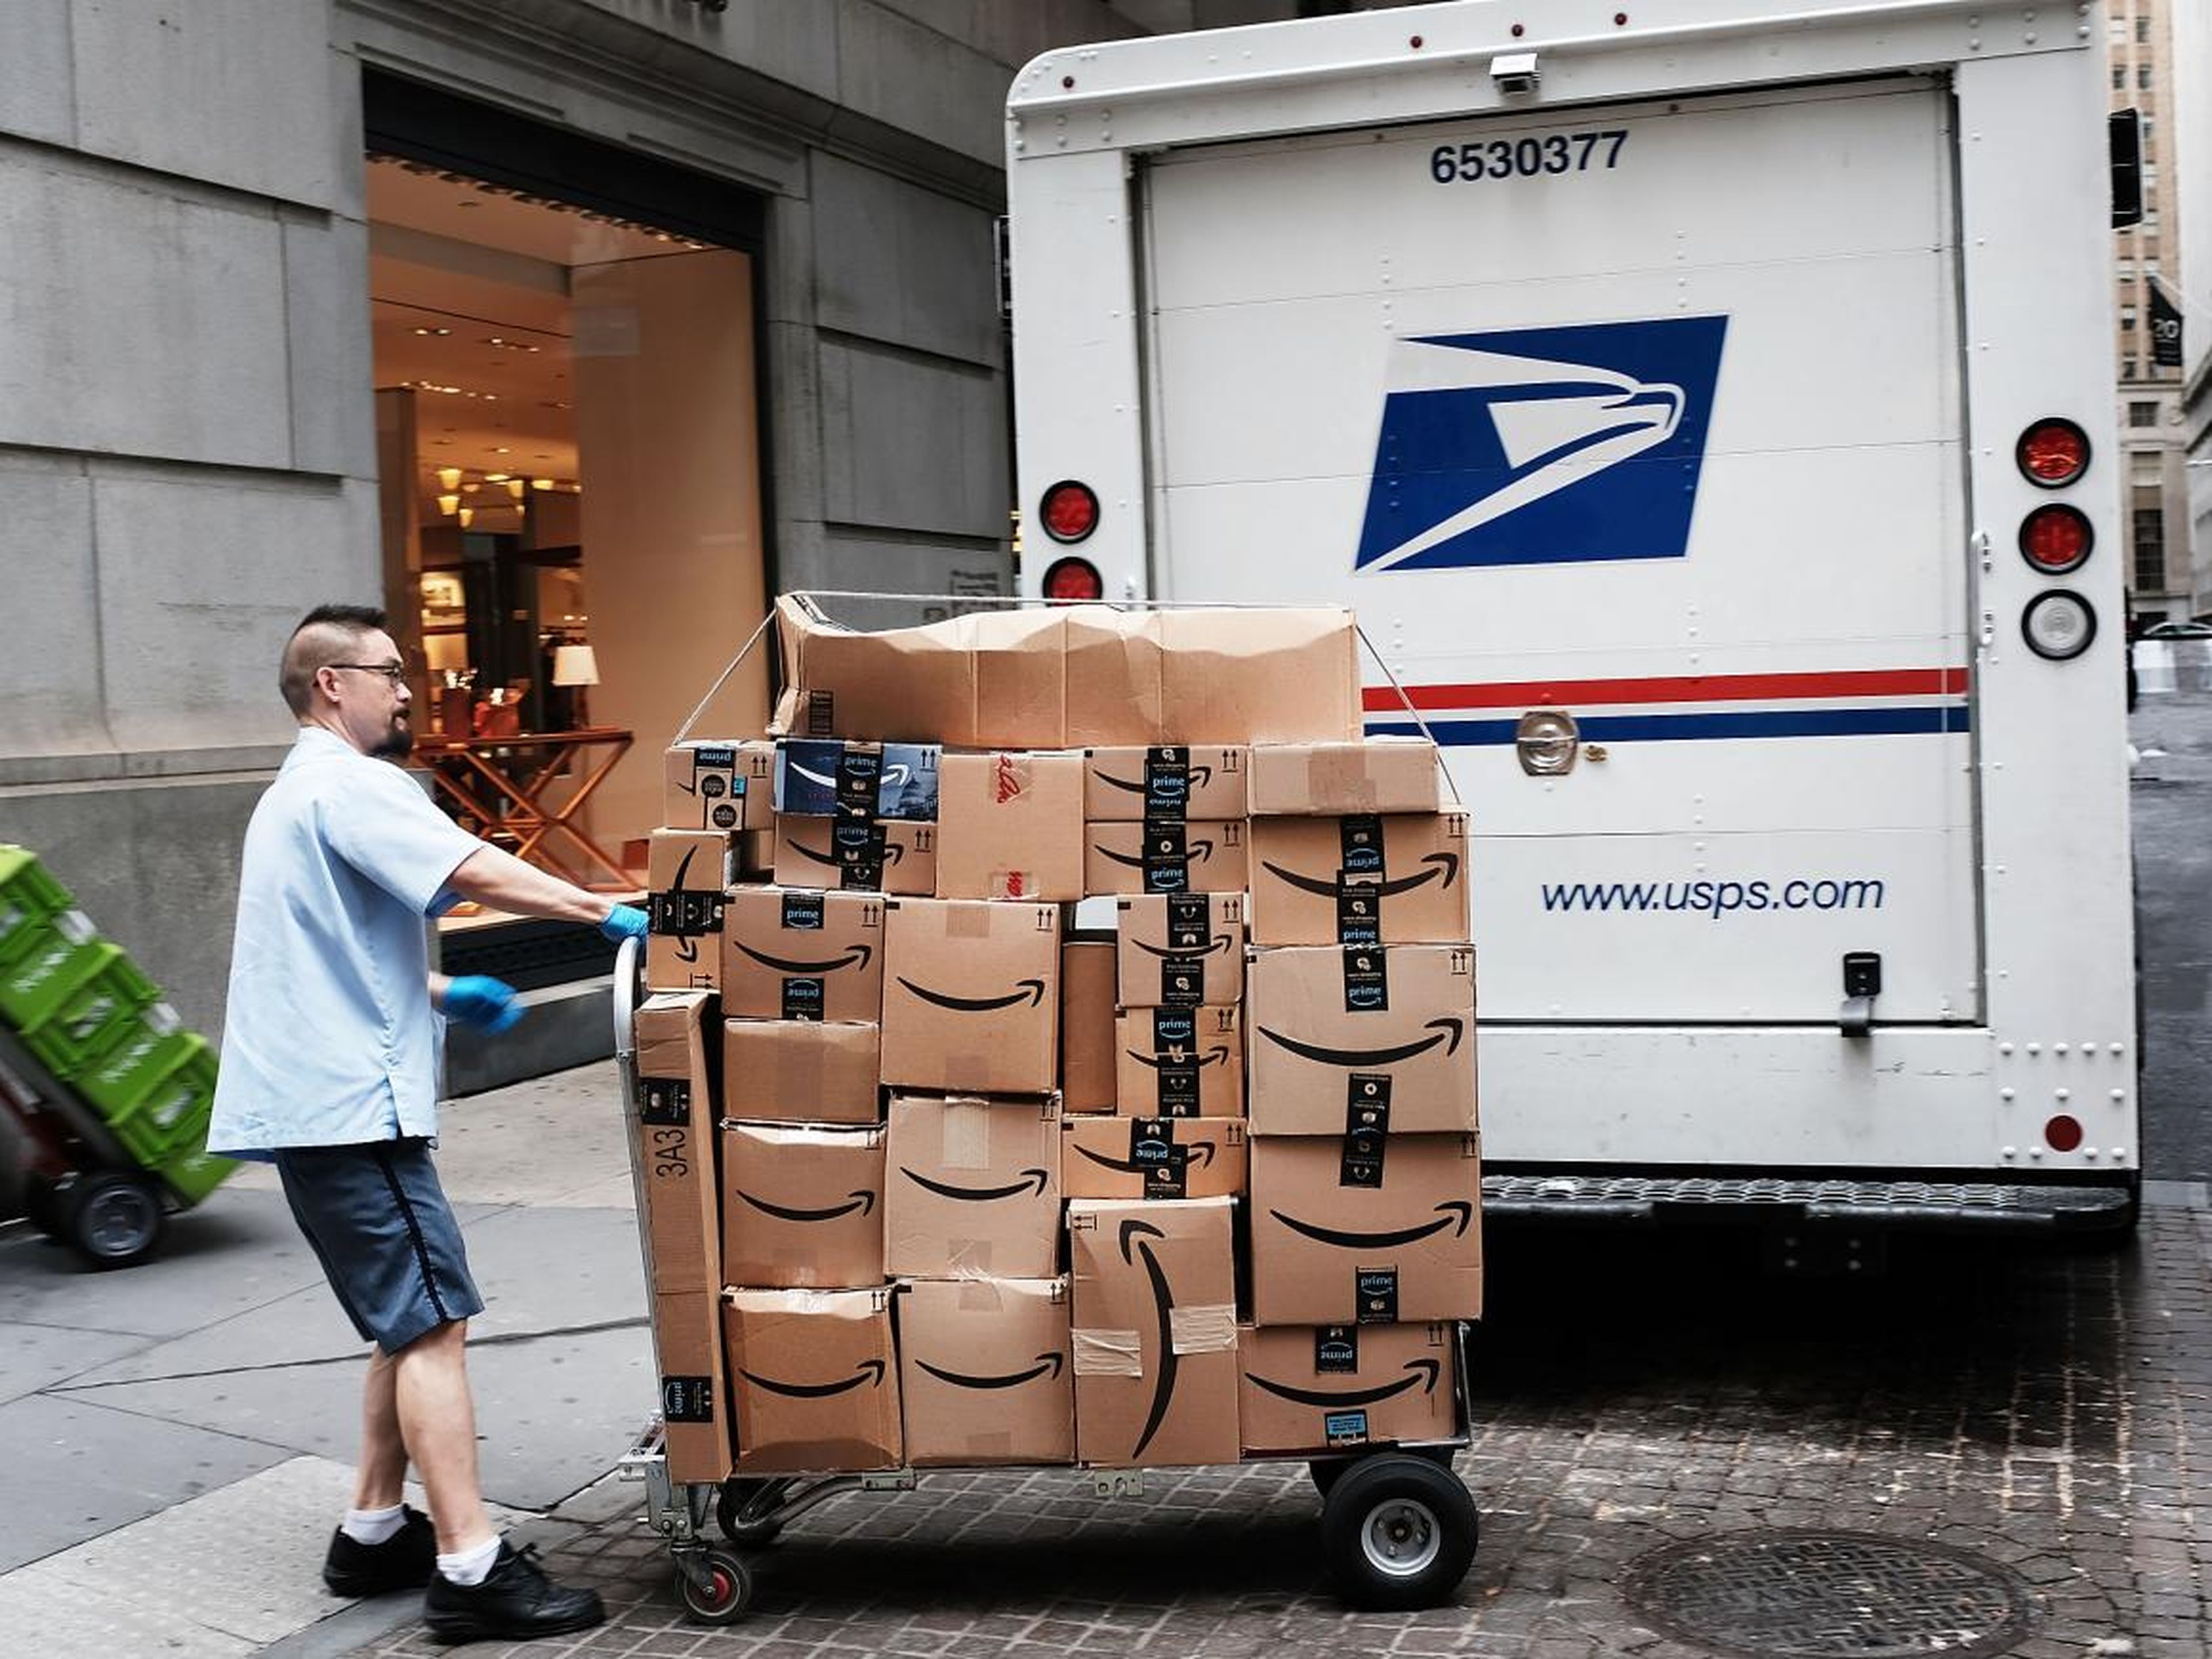 A USPS worker delivering Amazon packages to businesses.